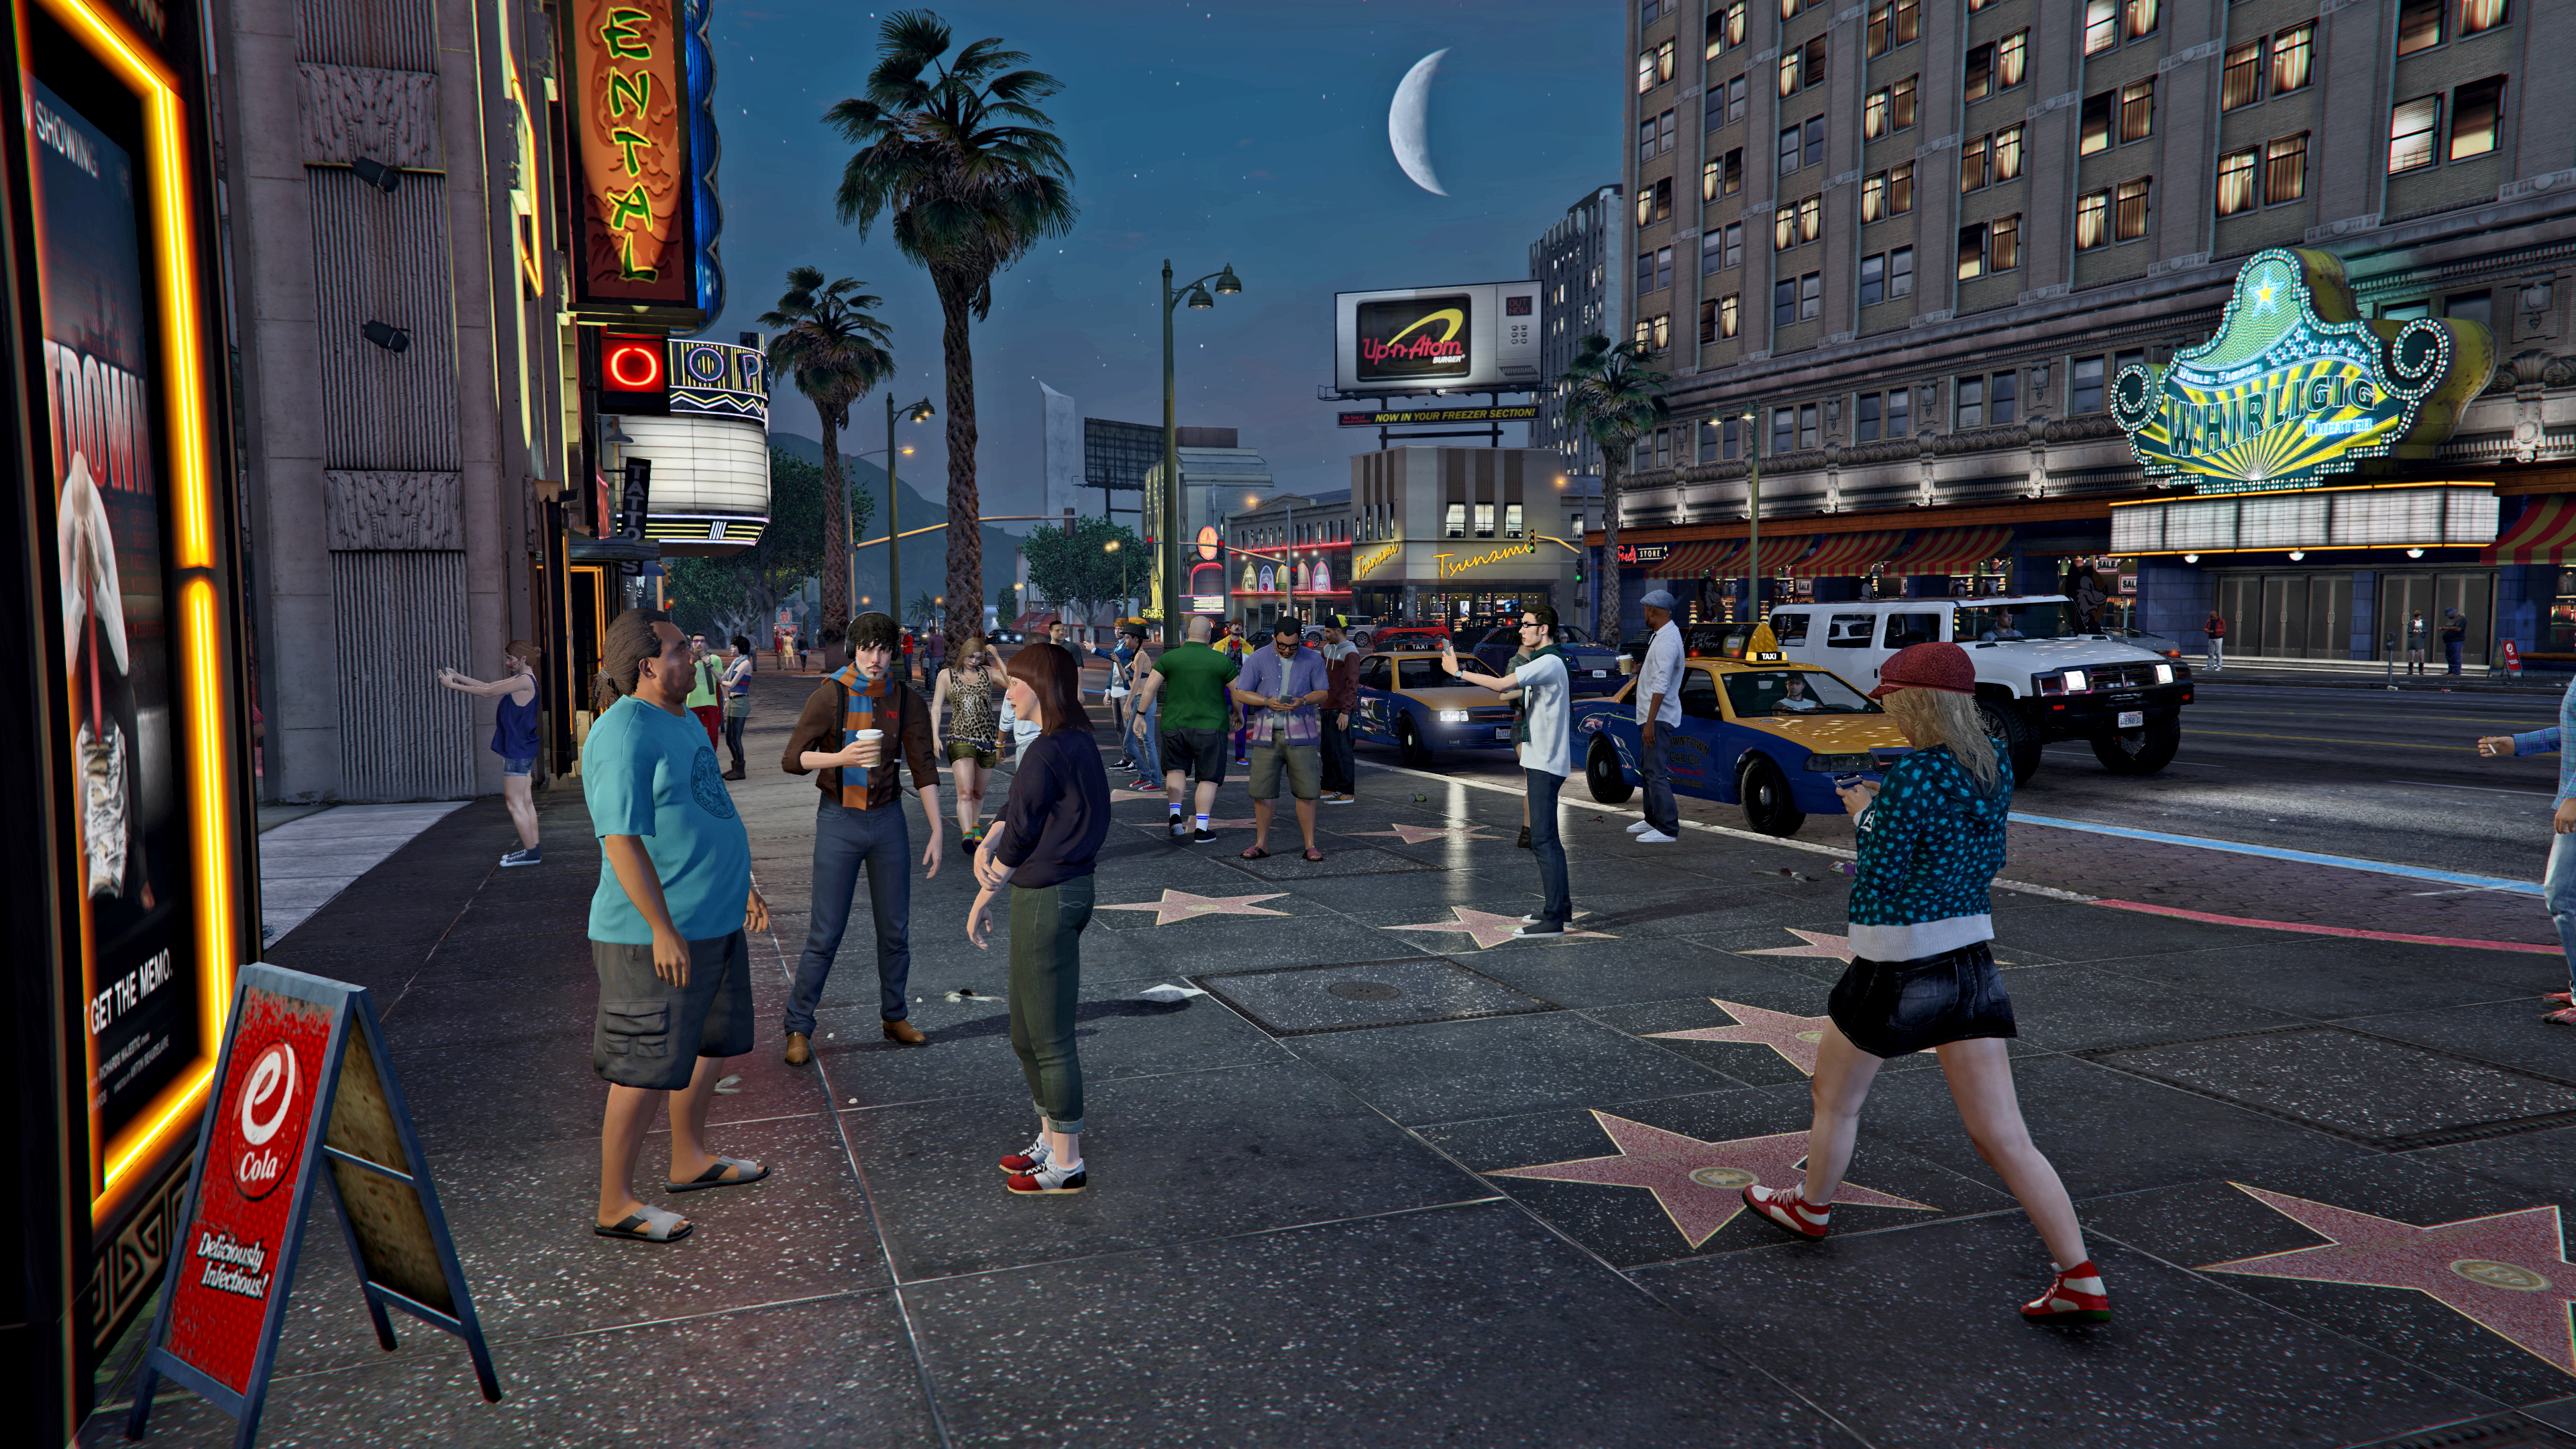 Best co-op games - Grand Theft Auto Online - A city street full of characters walking past Hollywood-style stars in the sidewalk at night